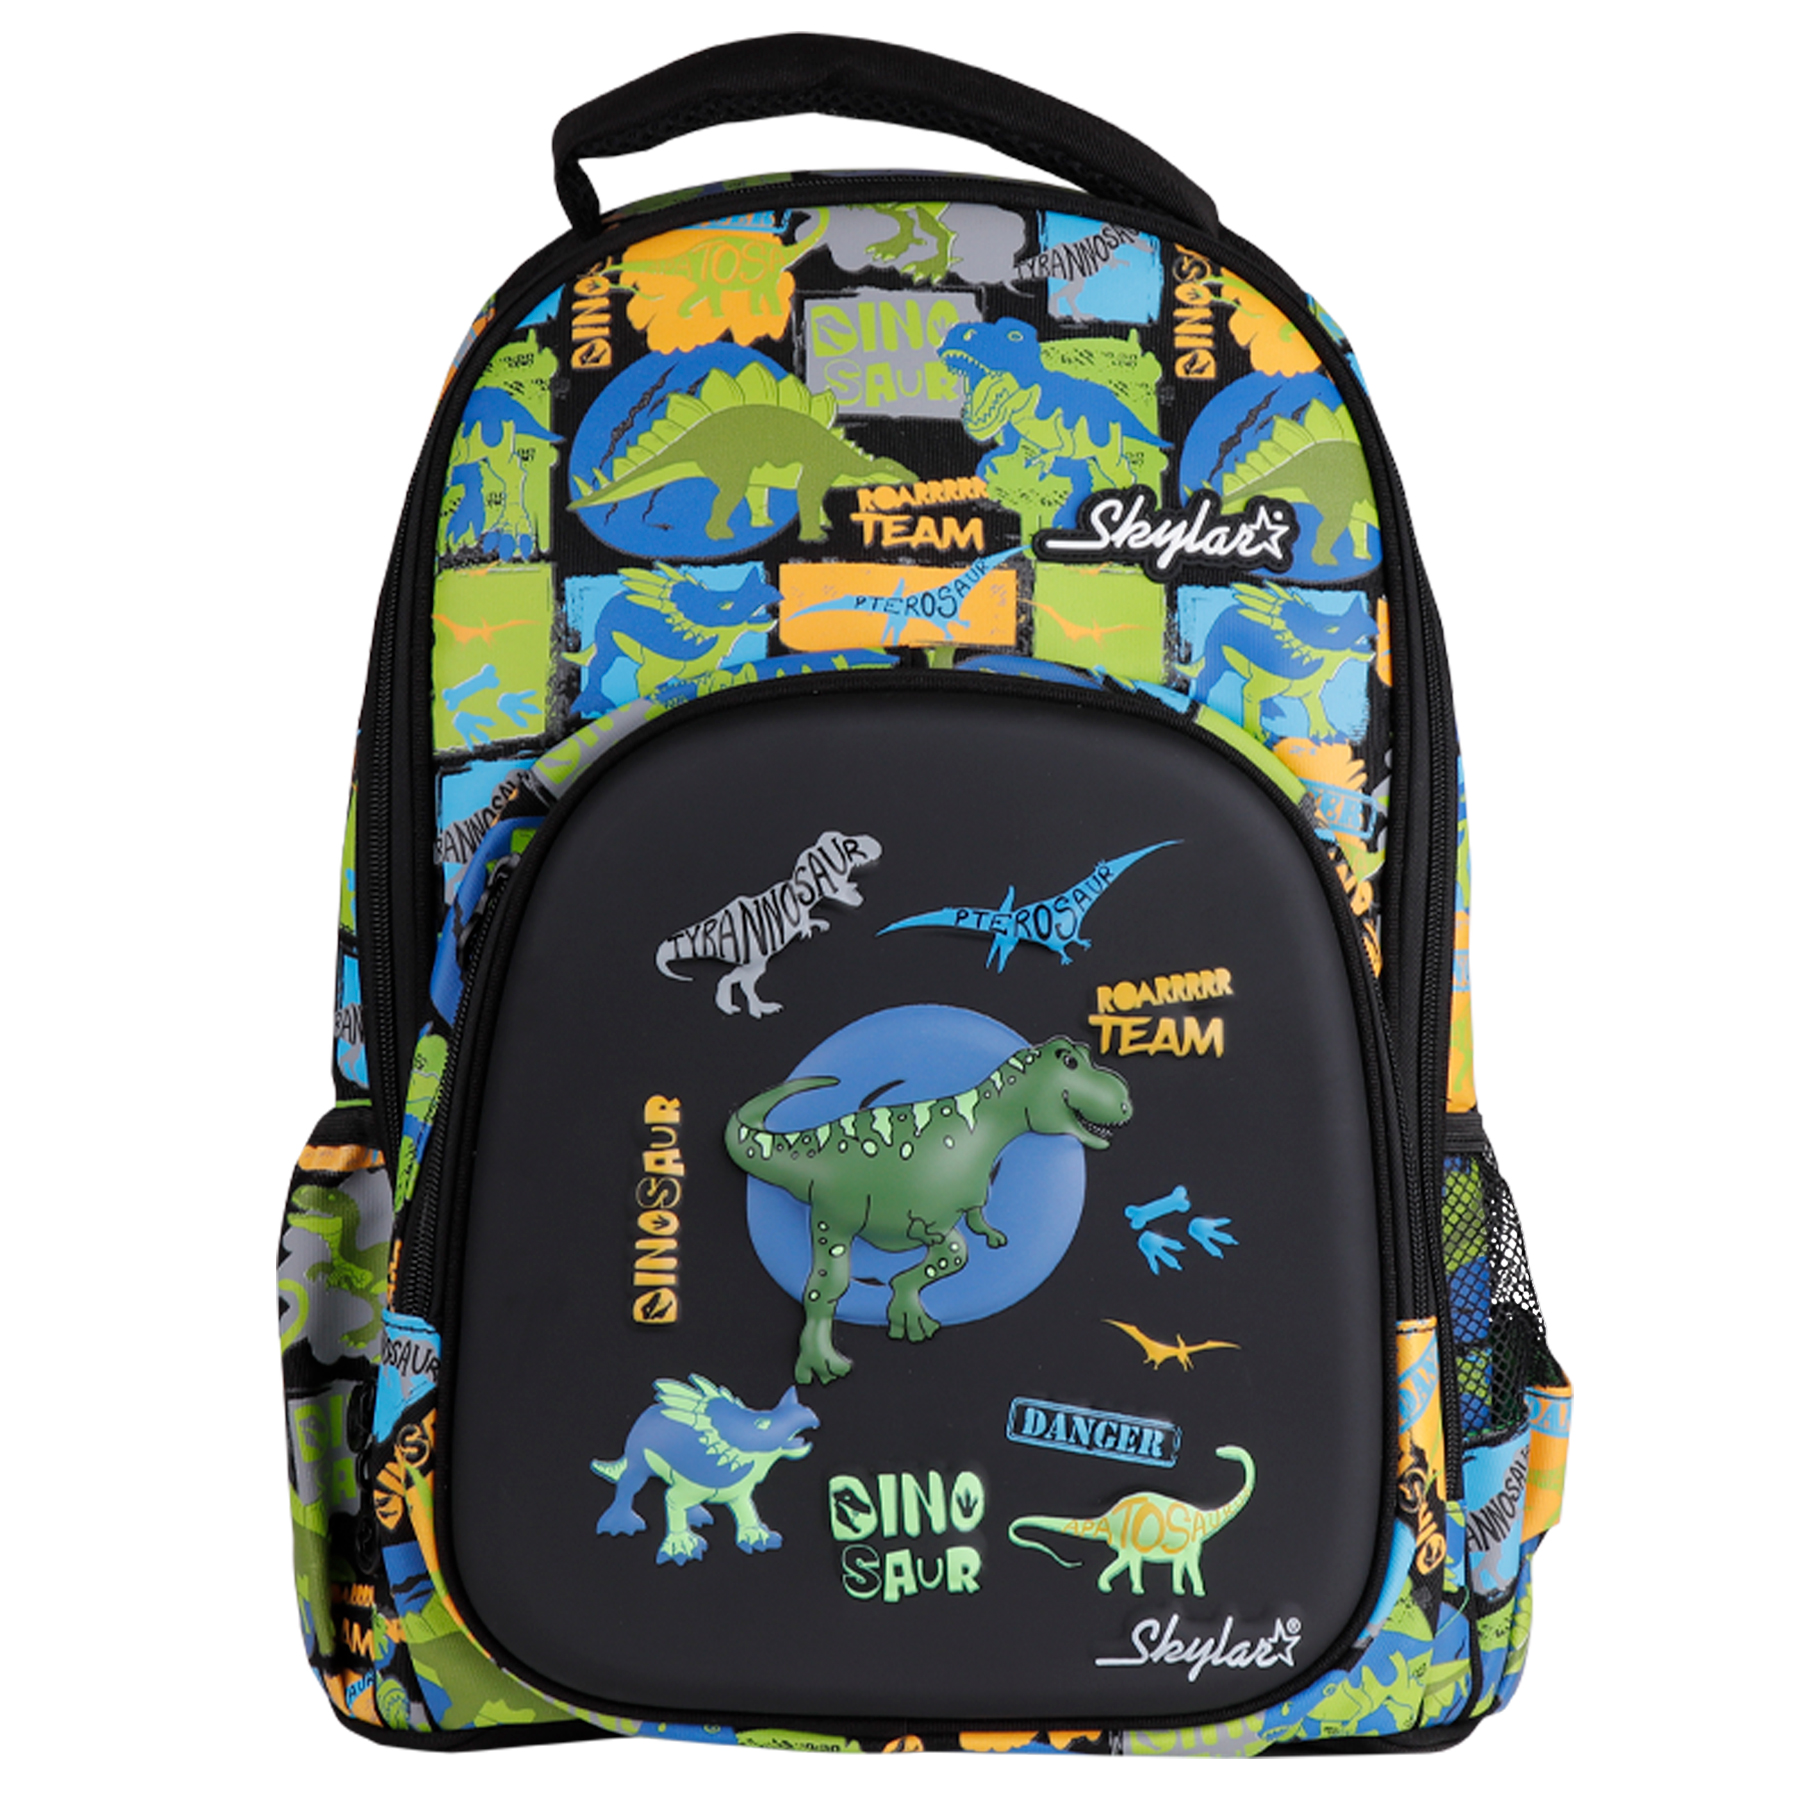 Wholesale MO094-02 SCHOOL BACKPACK Manufacturer and Supplier | Main ...